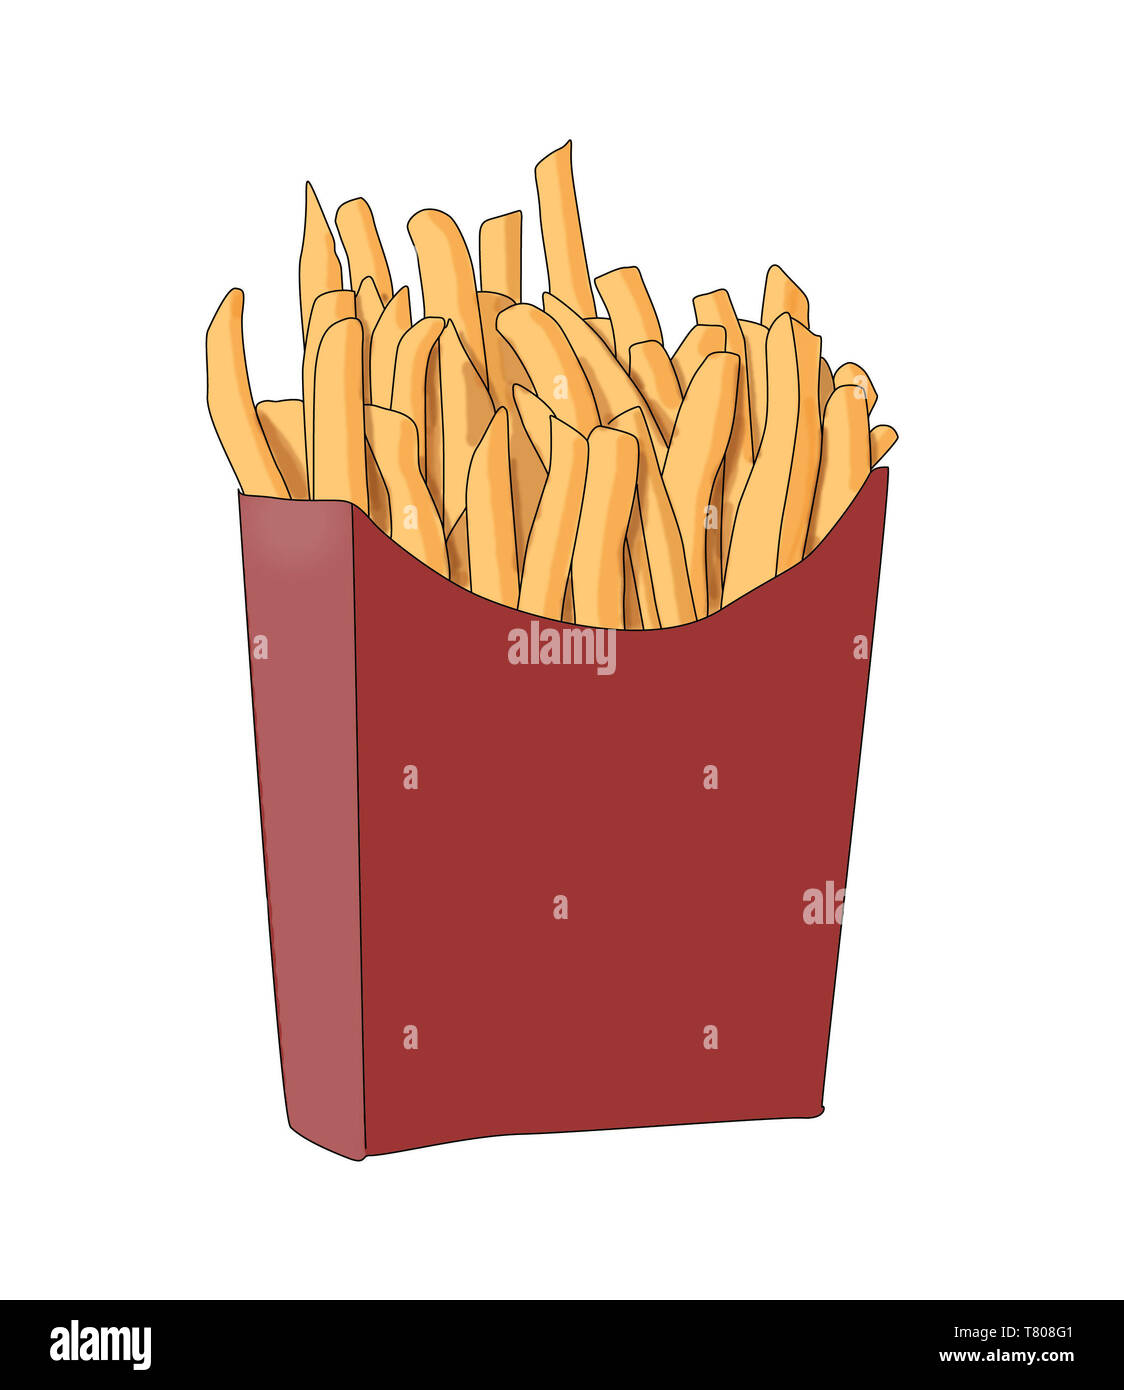 French Fries, Junk Food, Illustration Stock Photo